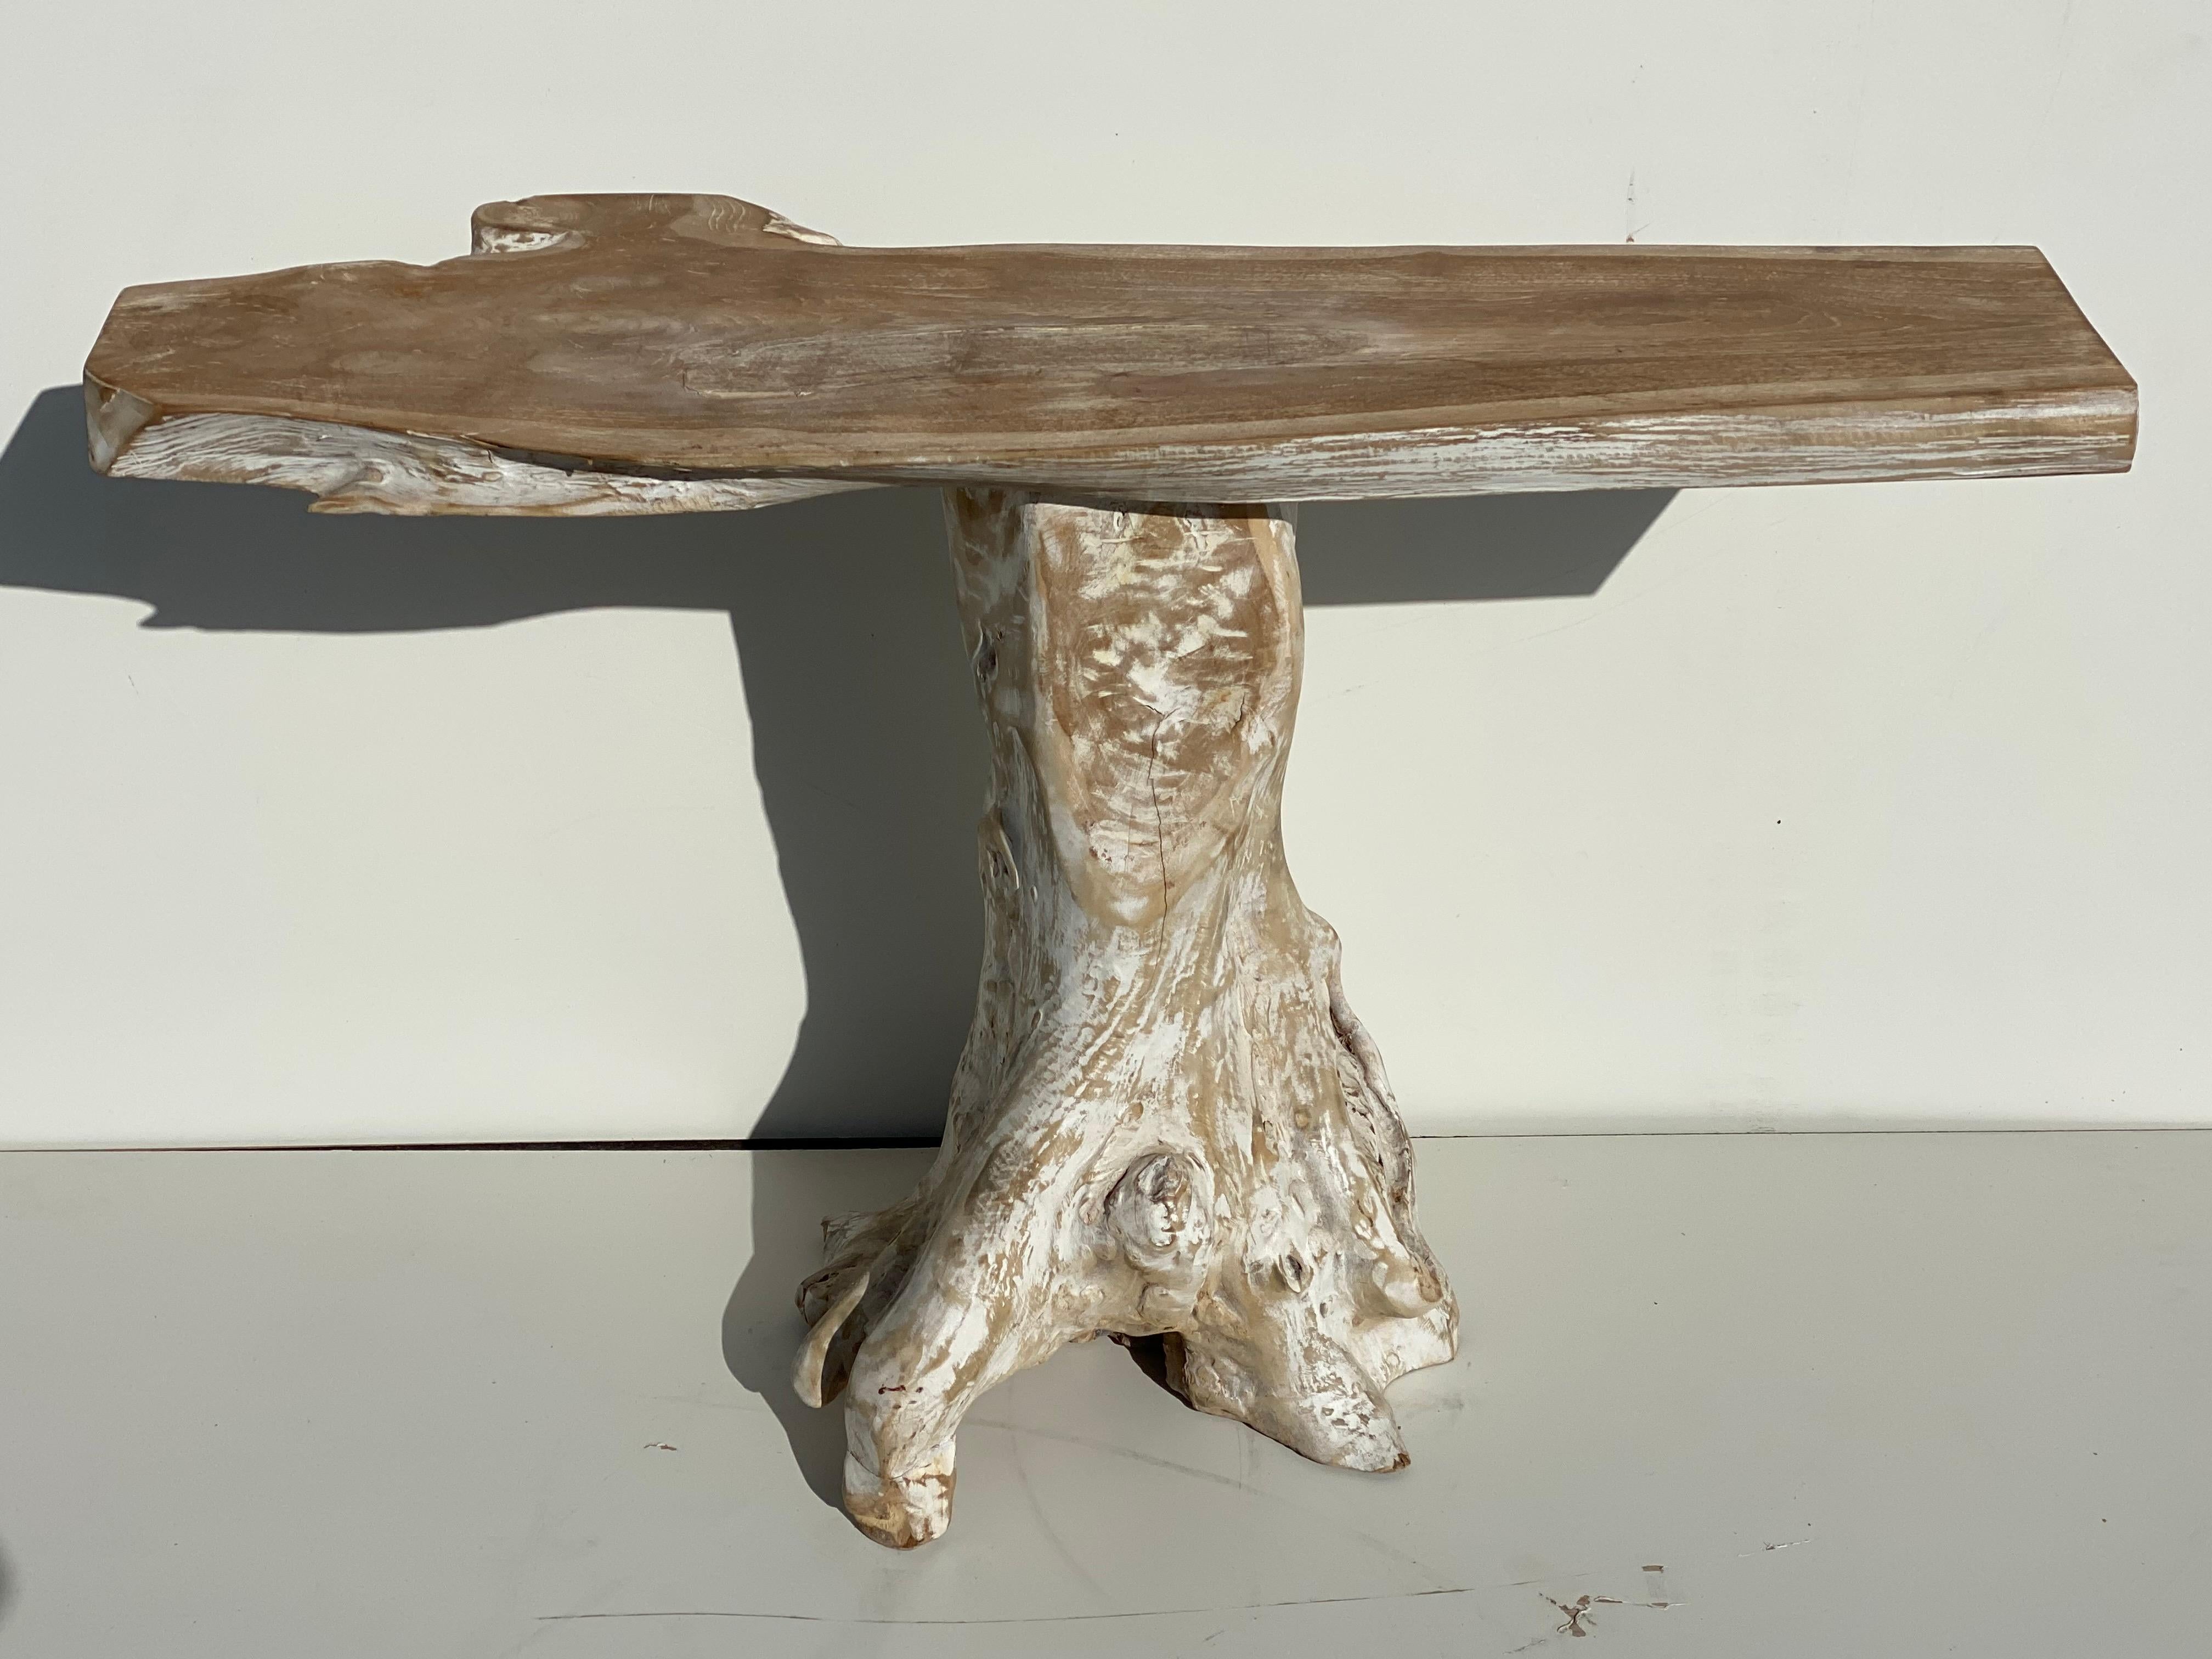 Teak root console table in white wash finish. Top is 47